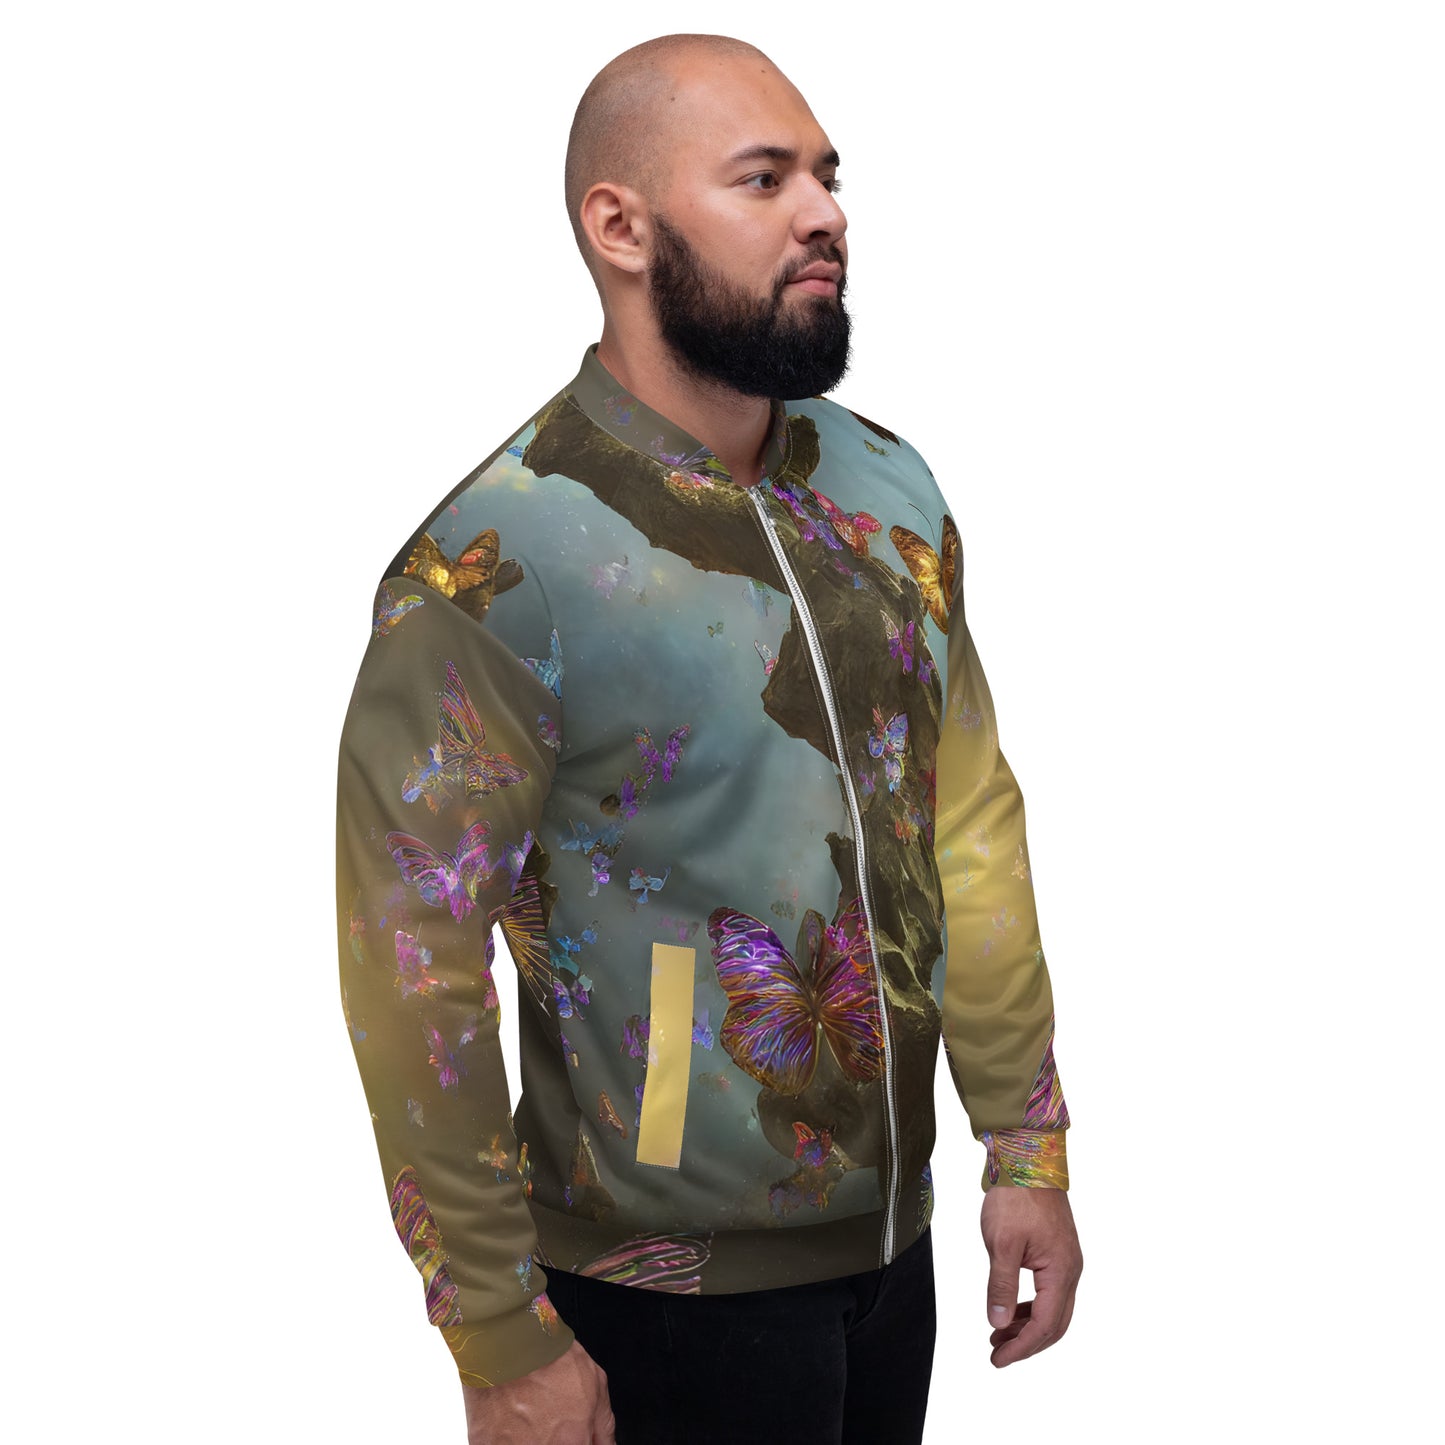 Holographic Butterflies Print Patterns Collection